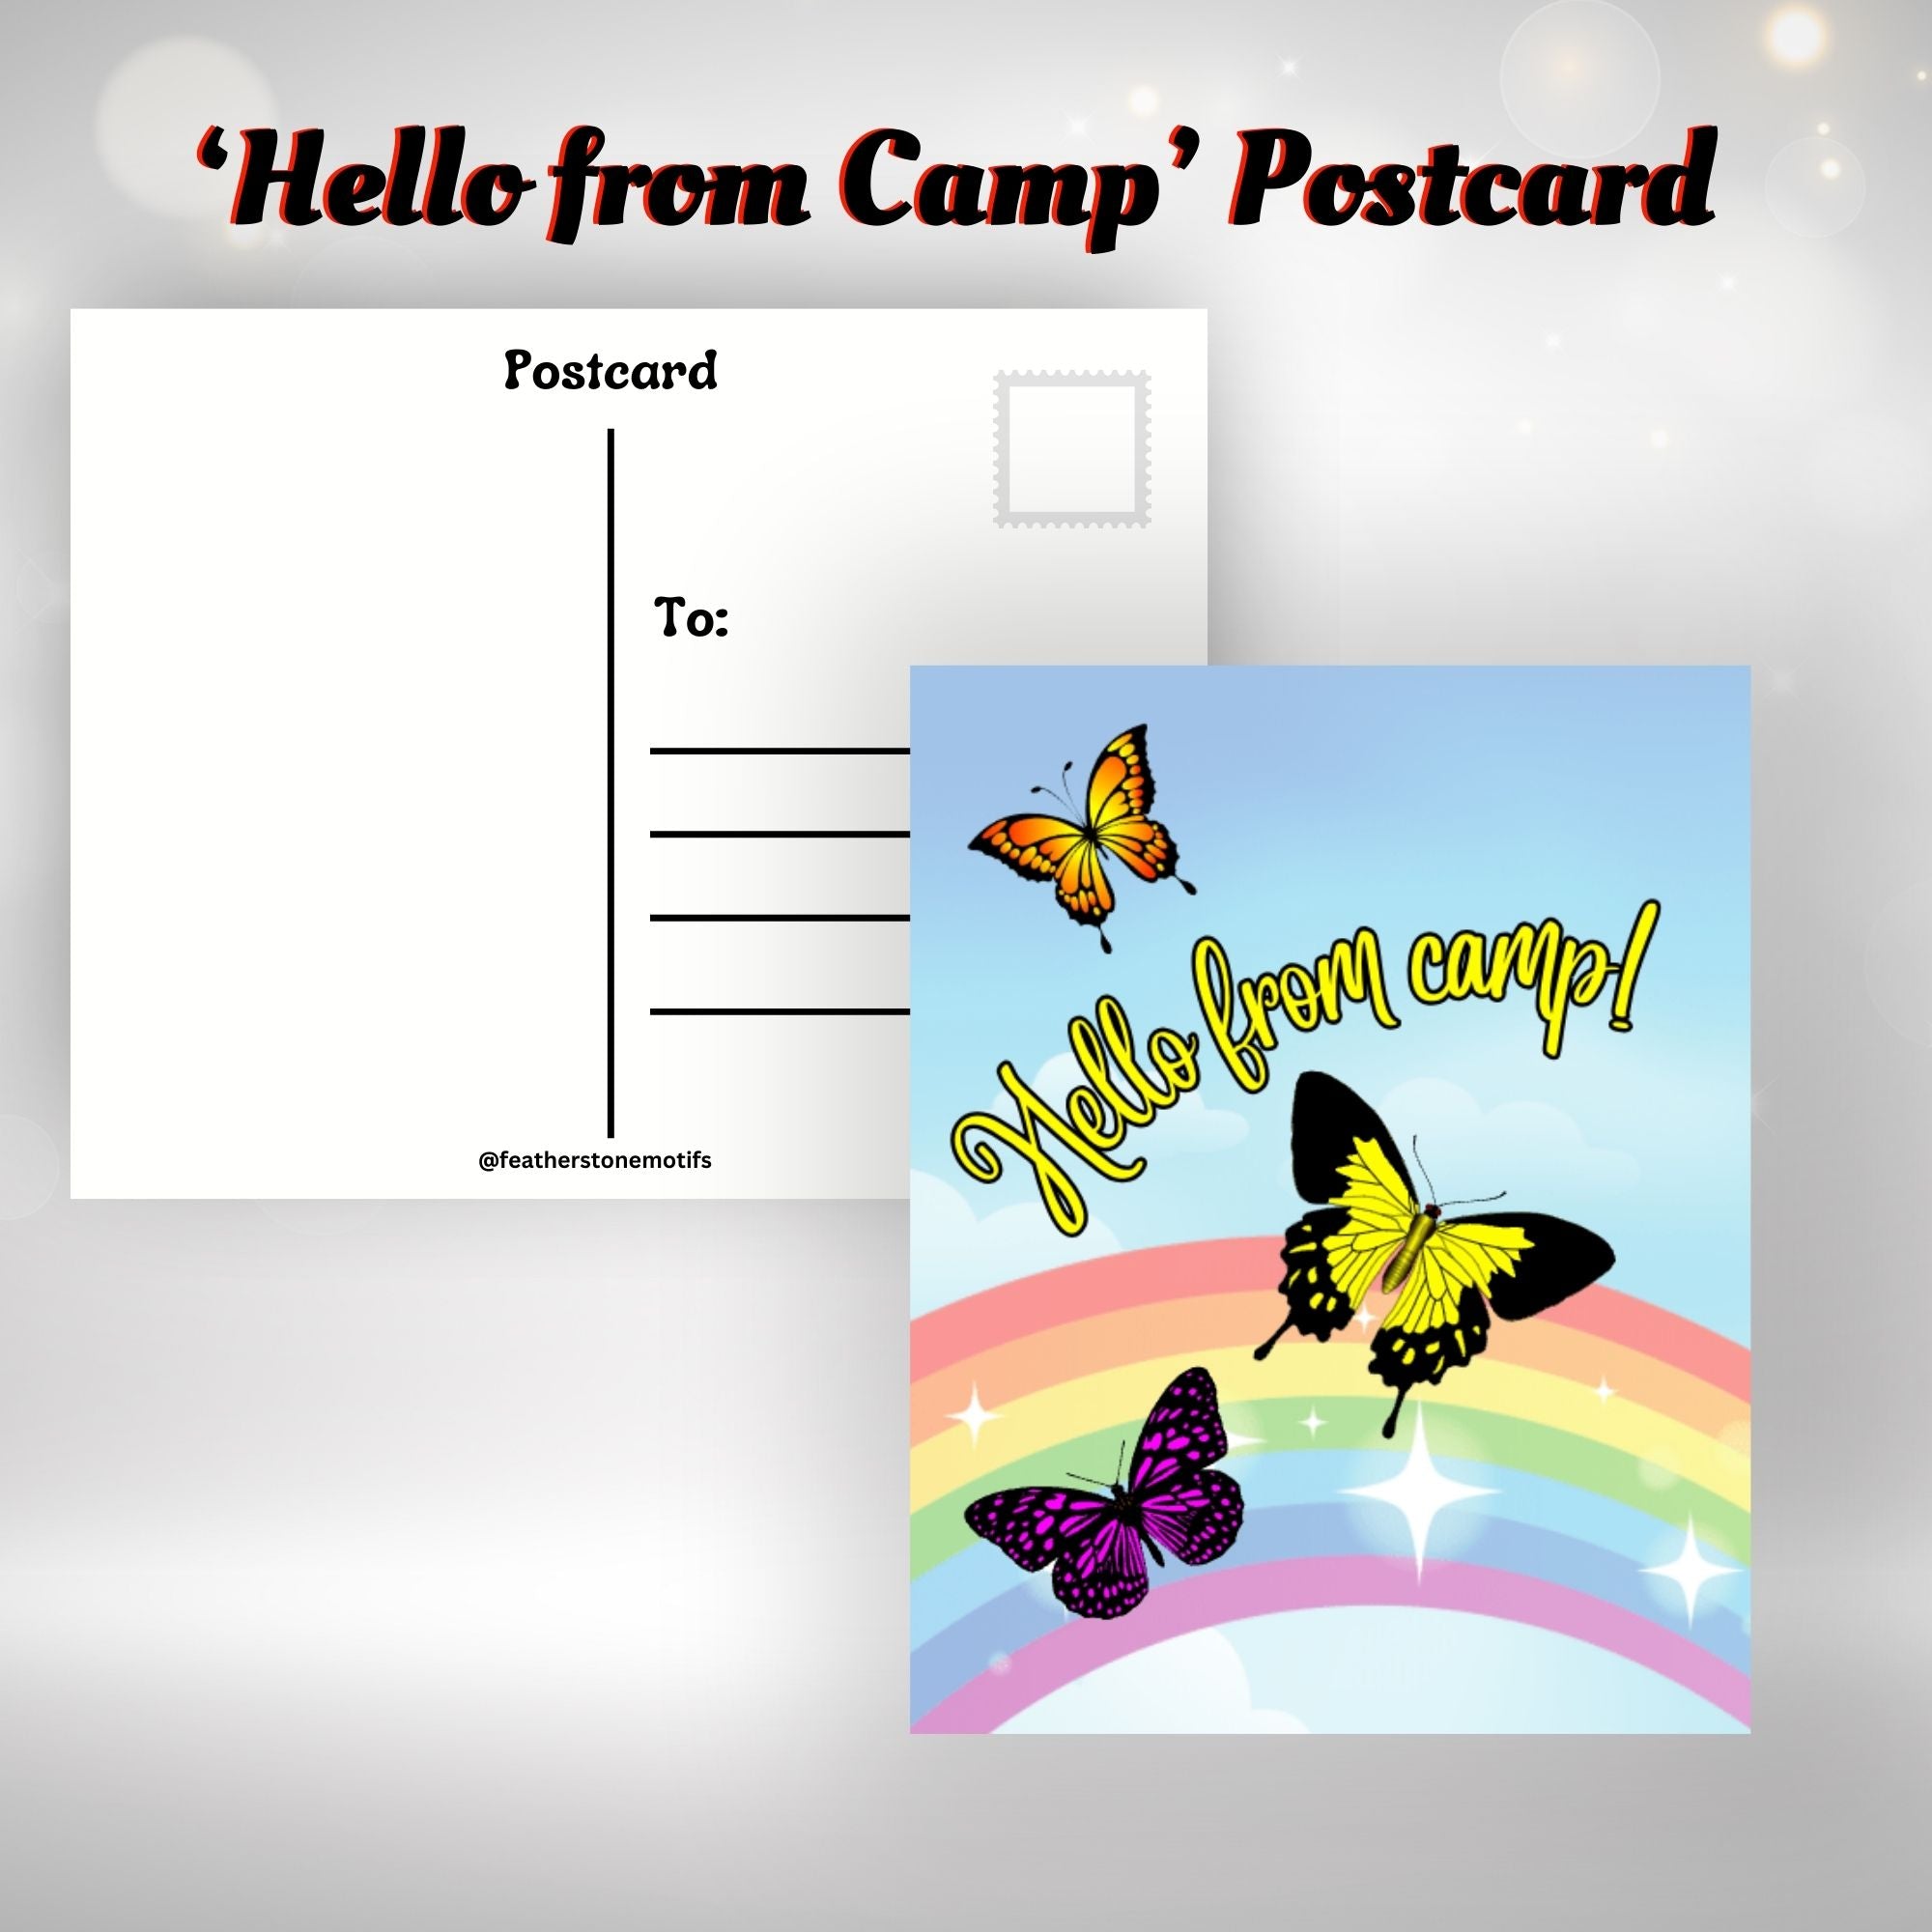 This image shows the Hello from Camp! postcard with three butterflies in front of a rainbow.